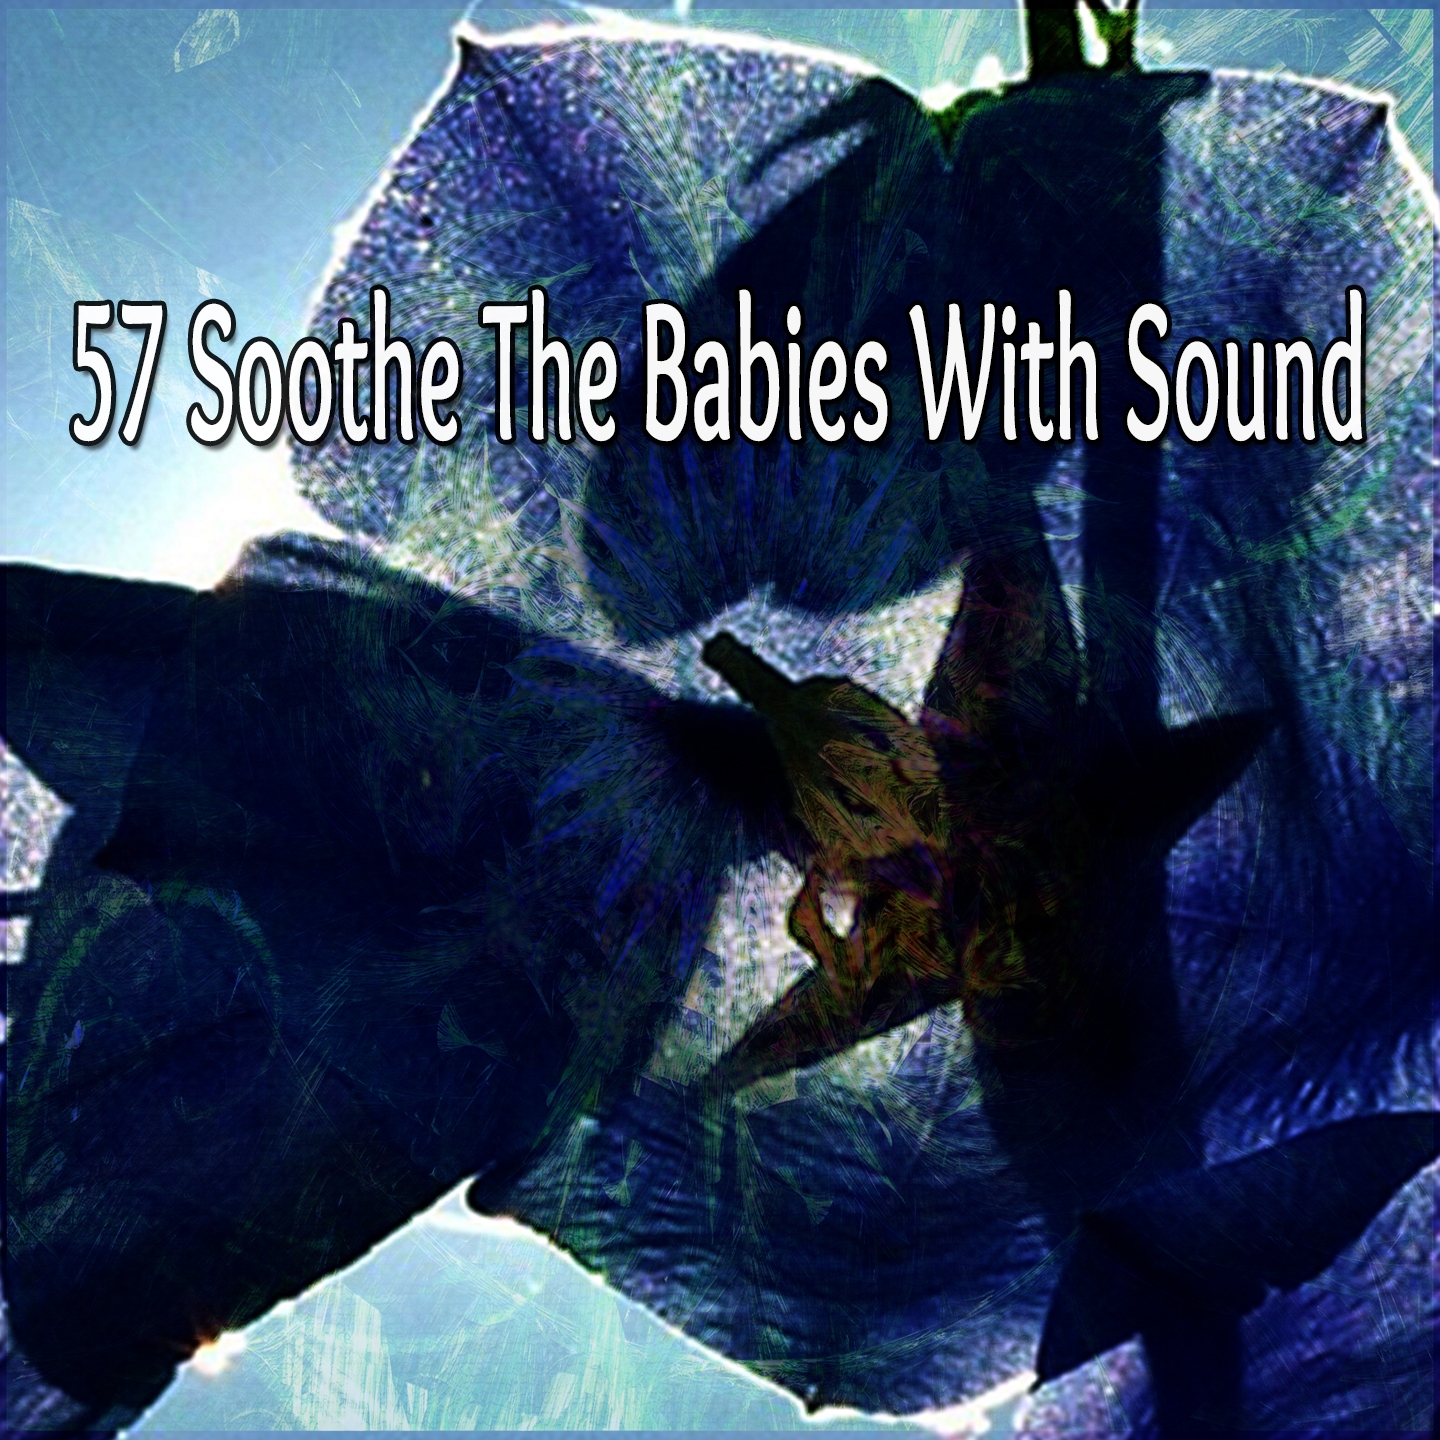 57 Soothe The Babies With Sound